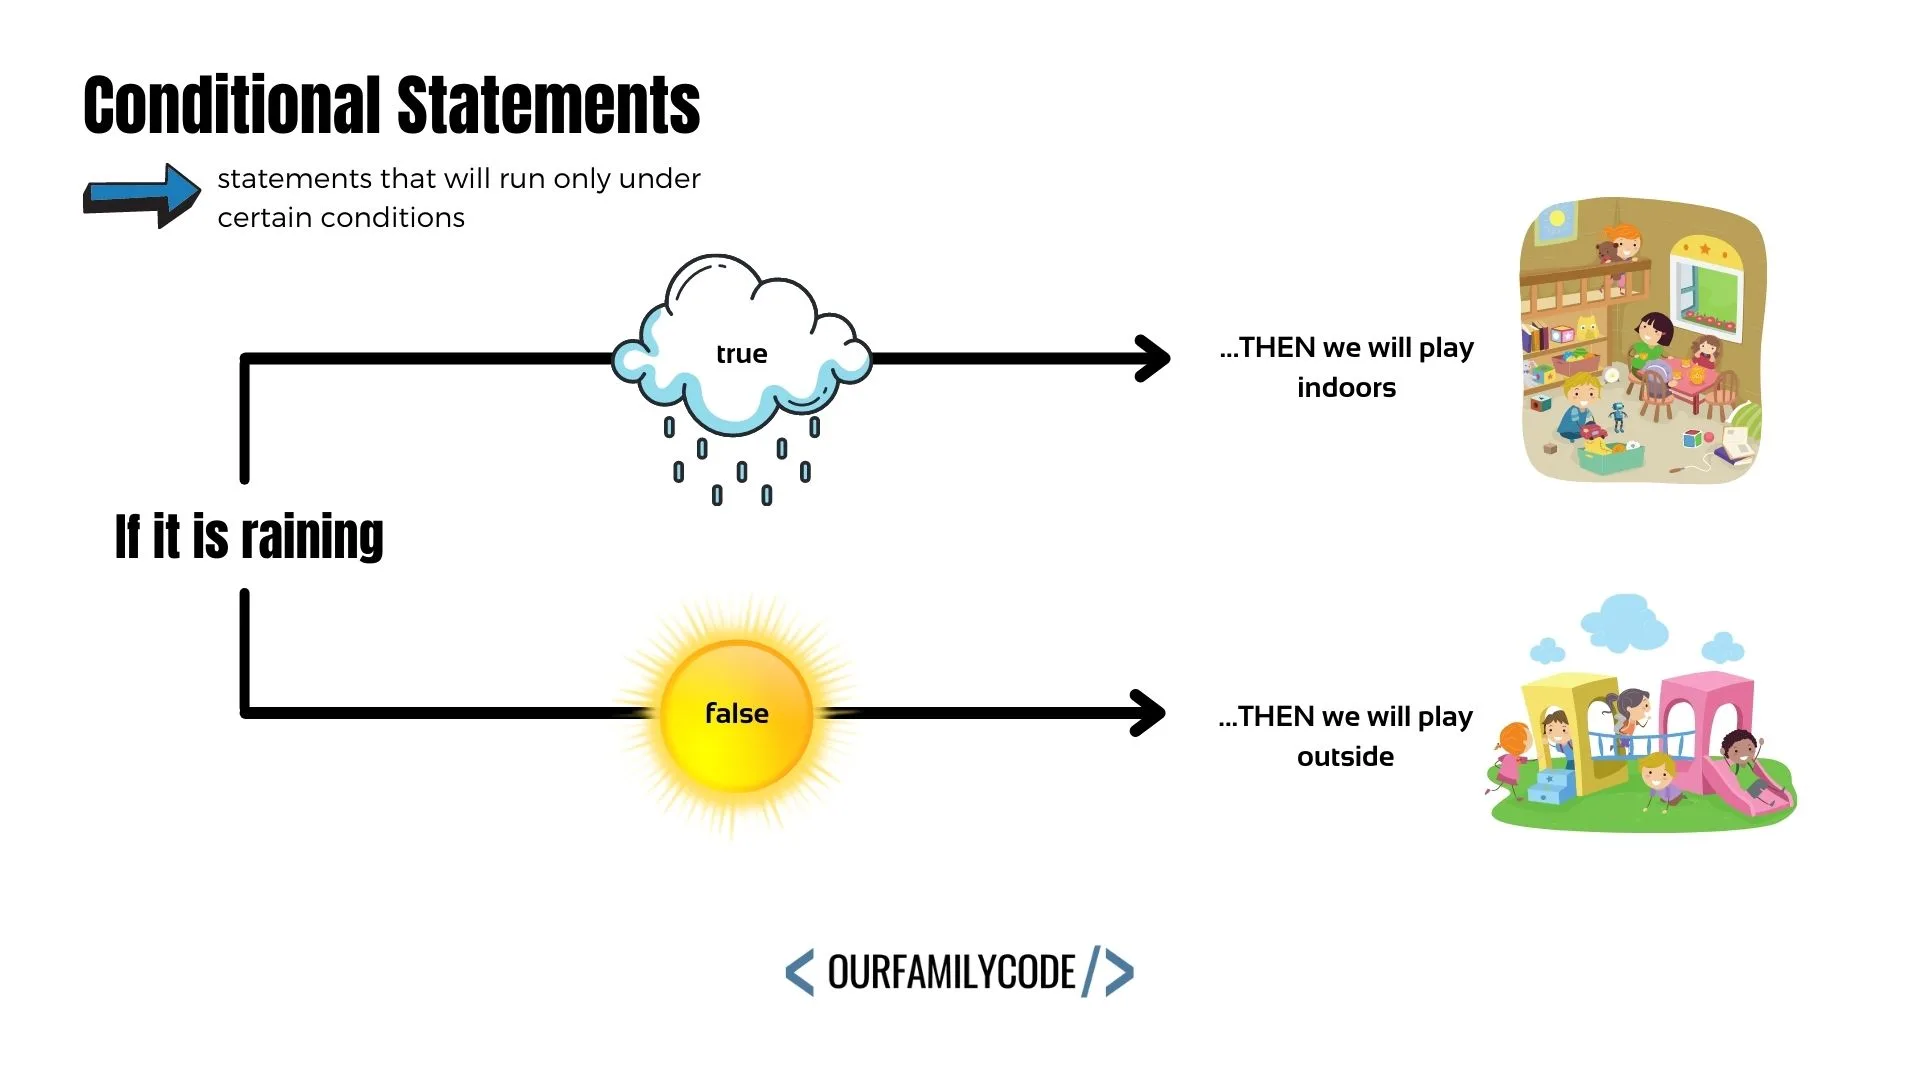 An image that shows a conditional statement flow with "if it is raining" and two branches to conditions that are either "true" or "false" and the outcomes of "then we will play indoors" or "then we will play outside". 